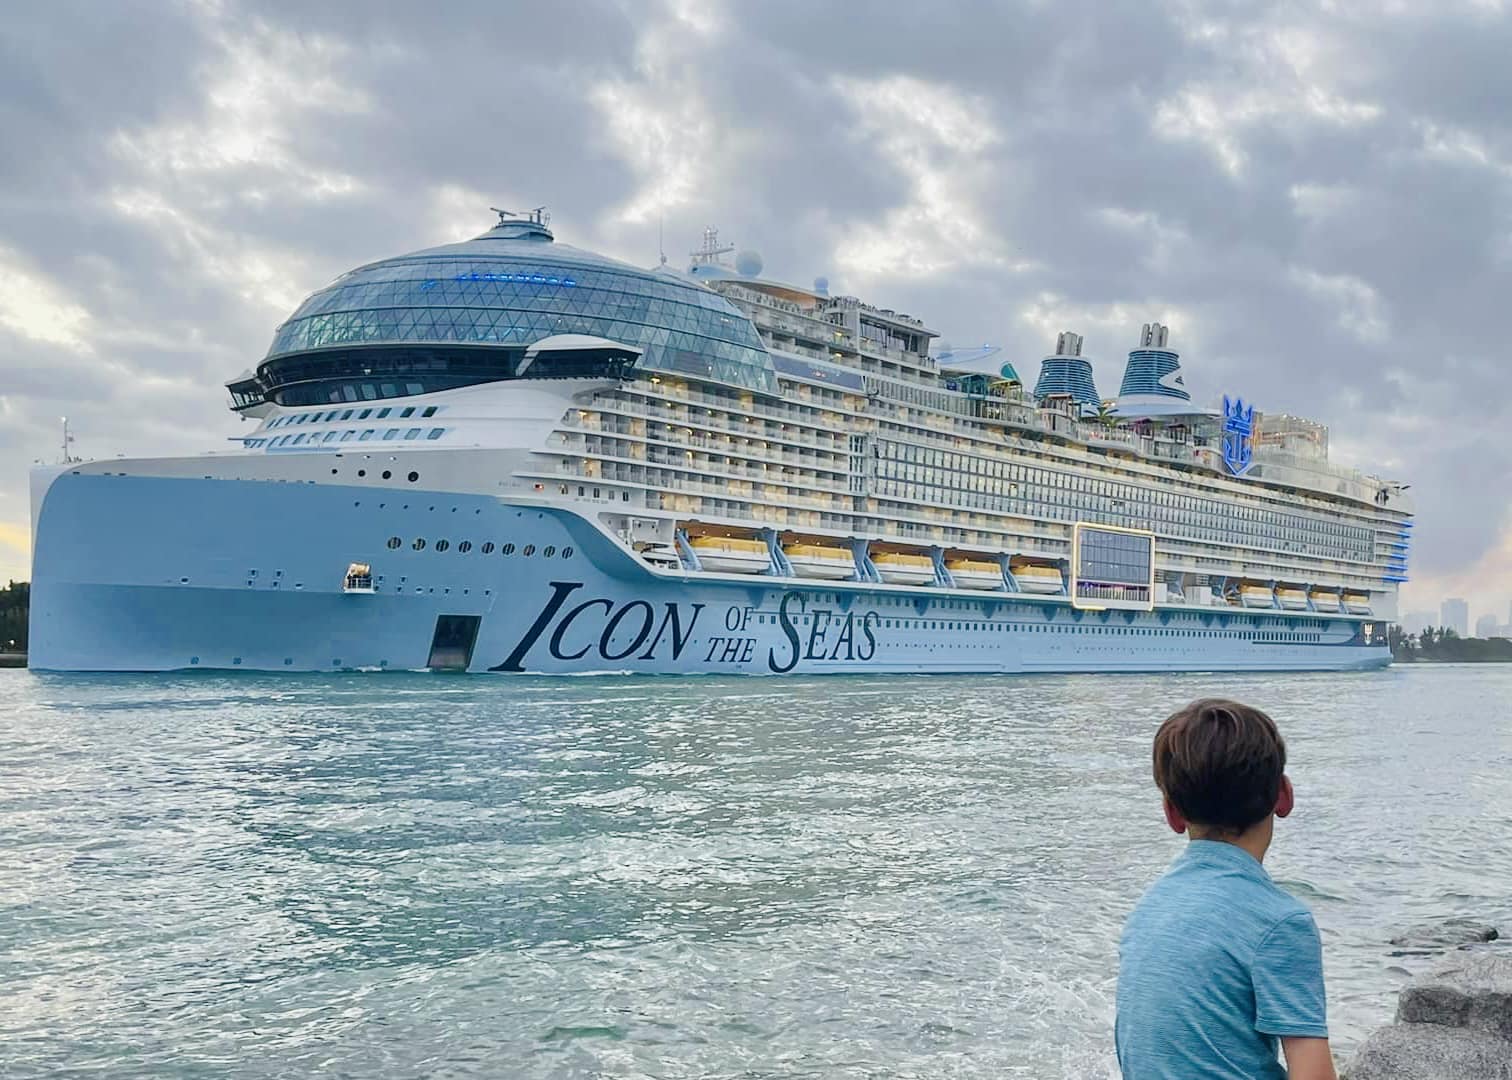 World's largest cruise ship sets sail, raising concerns about methane emissions